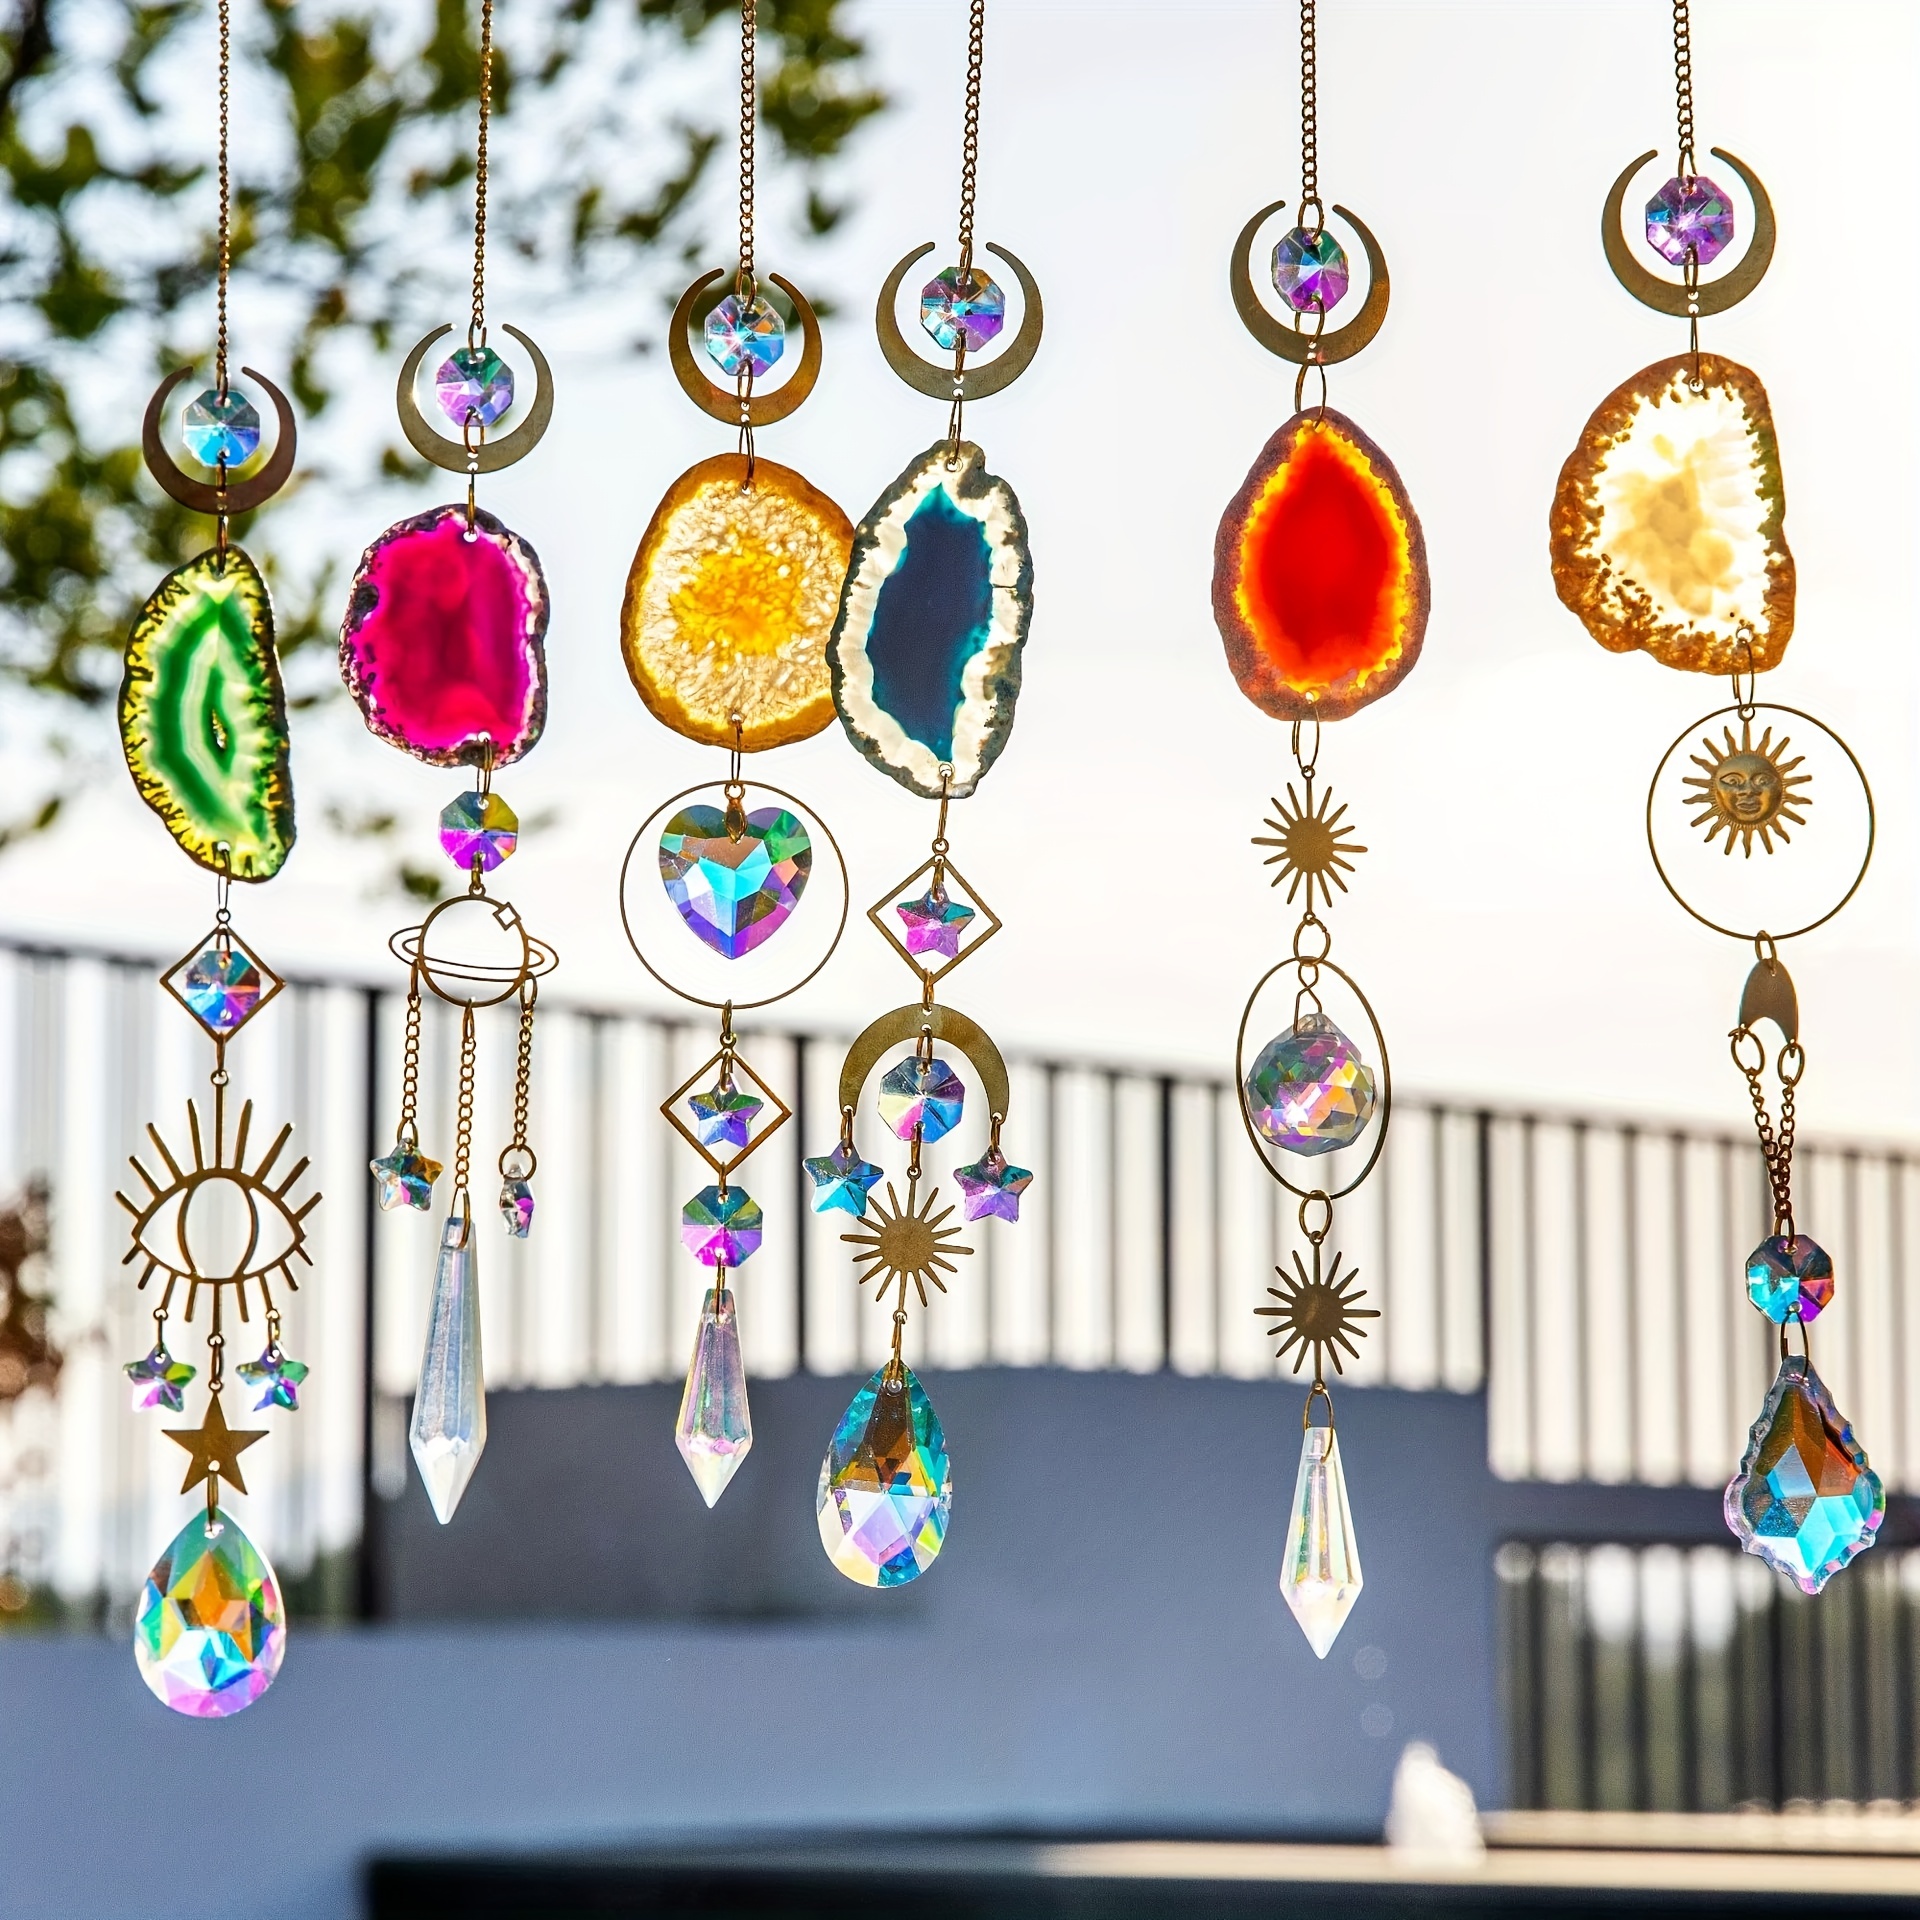 

1/6pcs Crystal Suncatcher Sun Catchers Indoor Window Hanging Sun Catchers With Crystals Light Catcher With Prisms And Agate Slices For Indoor Outdoor Home Garden Wedding Decorations